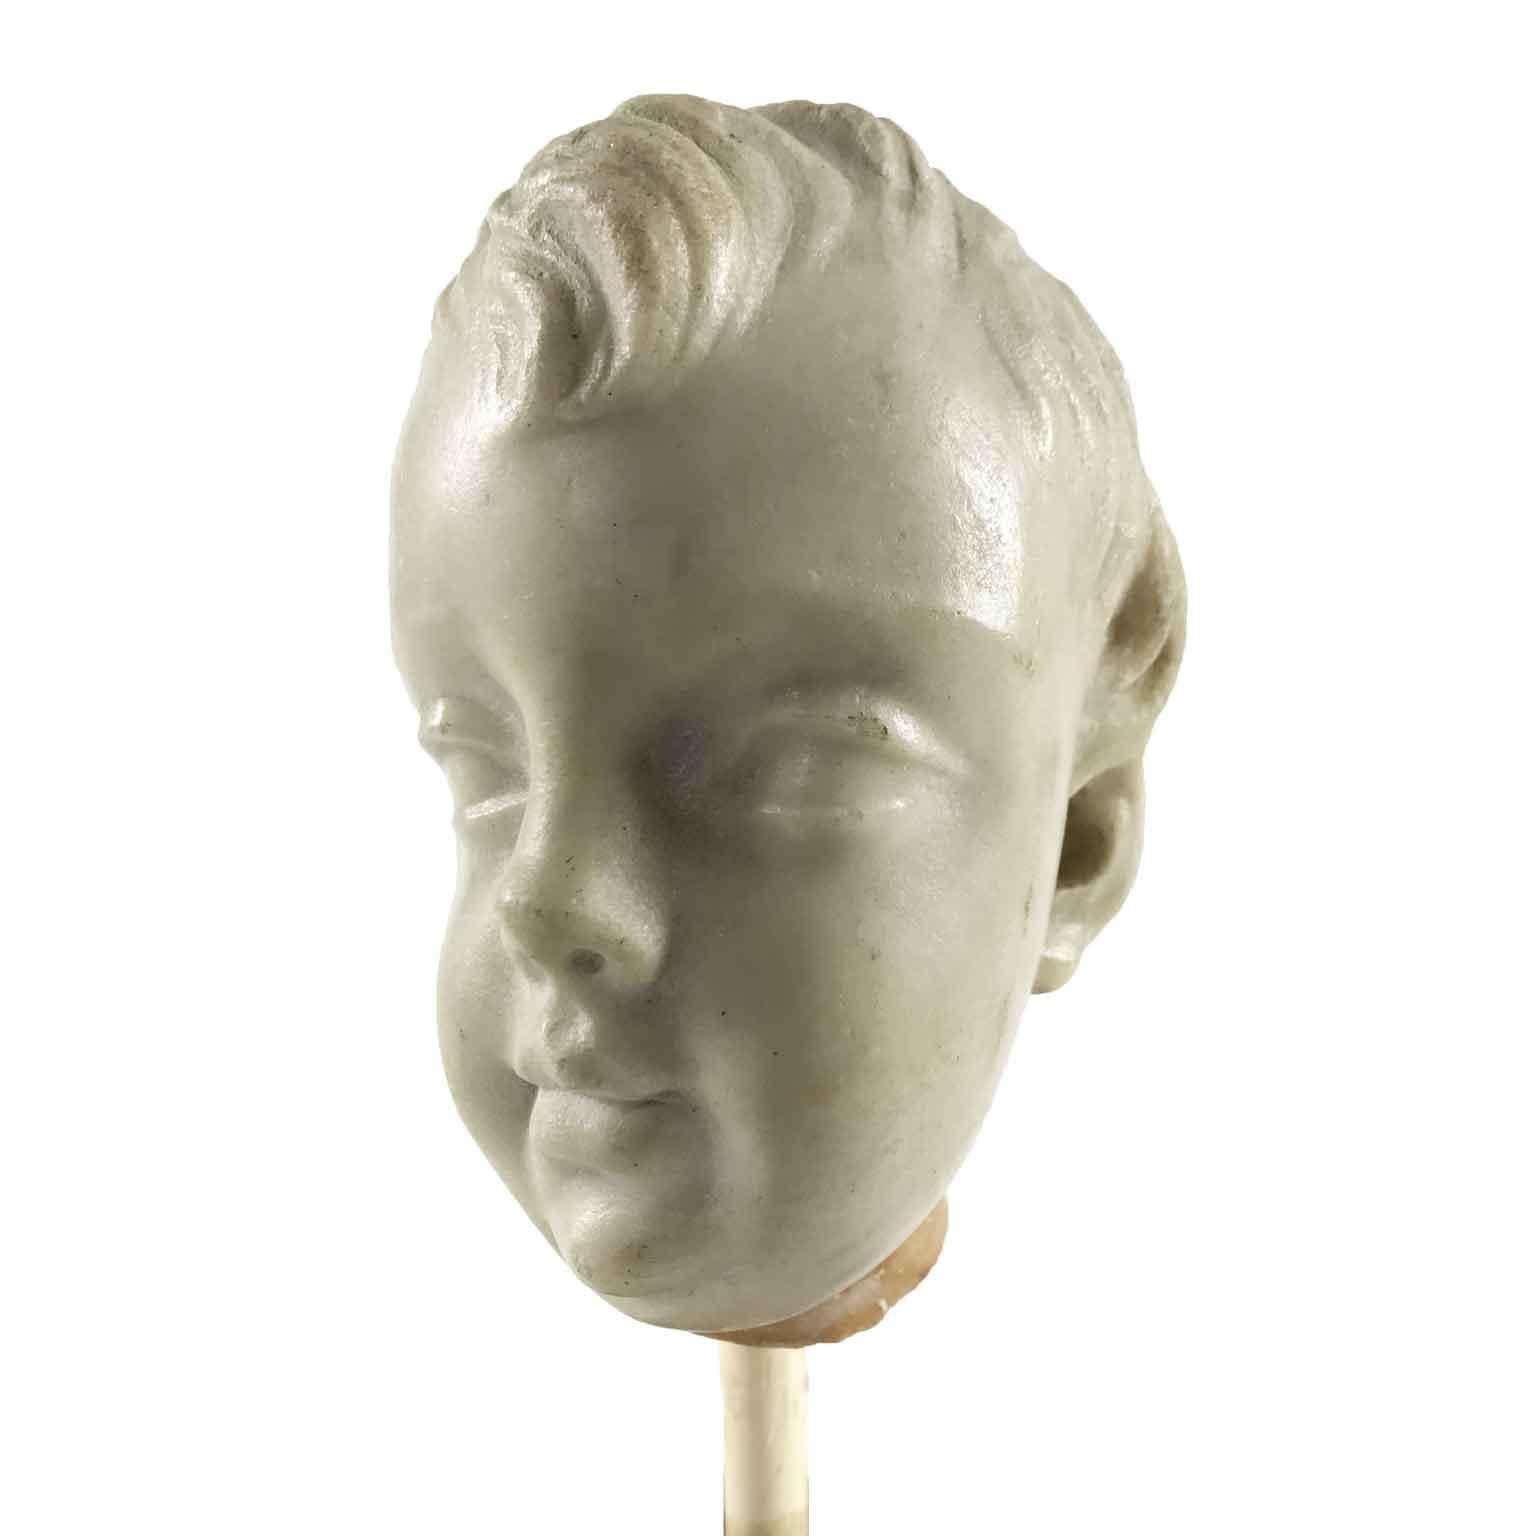 Lovely Baroque white marble angel head, Italy, circa 1650. This beautiful Italian carved white Carrara marble angel head is a fragment, a part of a sculptural group and stands on an ebonized wooden square base.

Good age related condition, marble